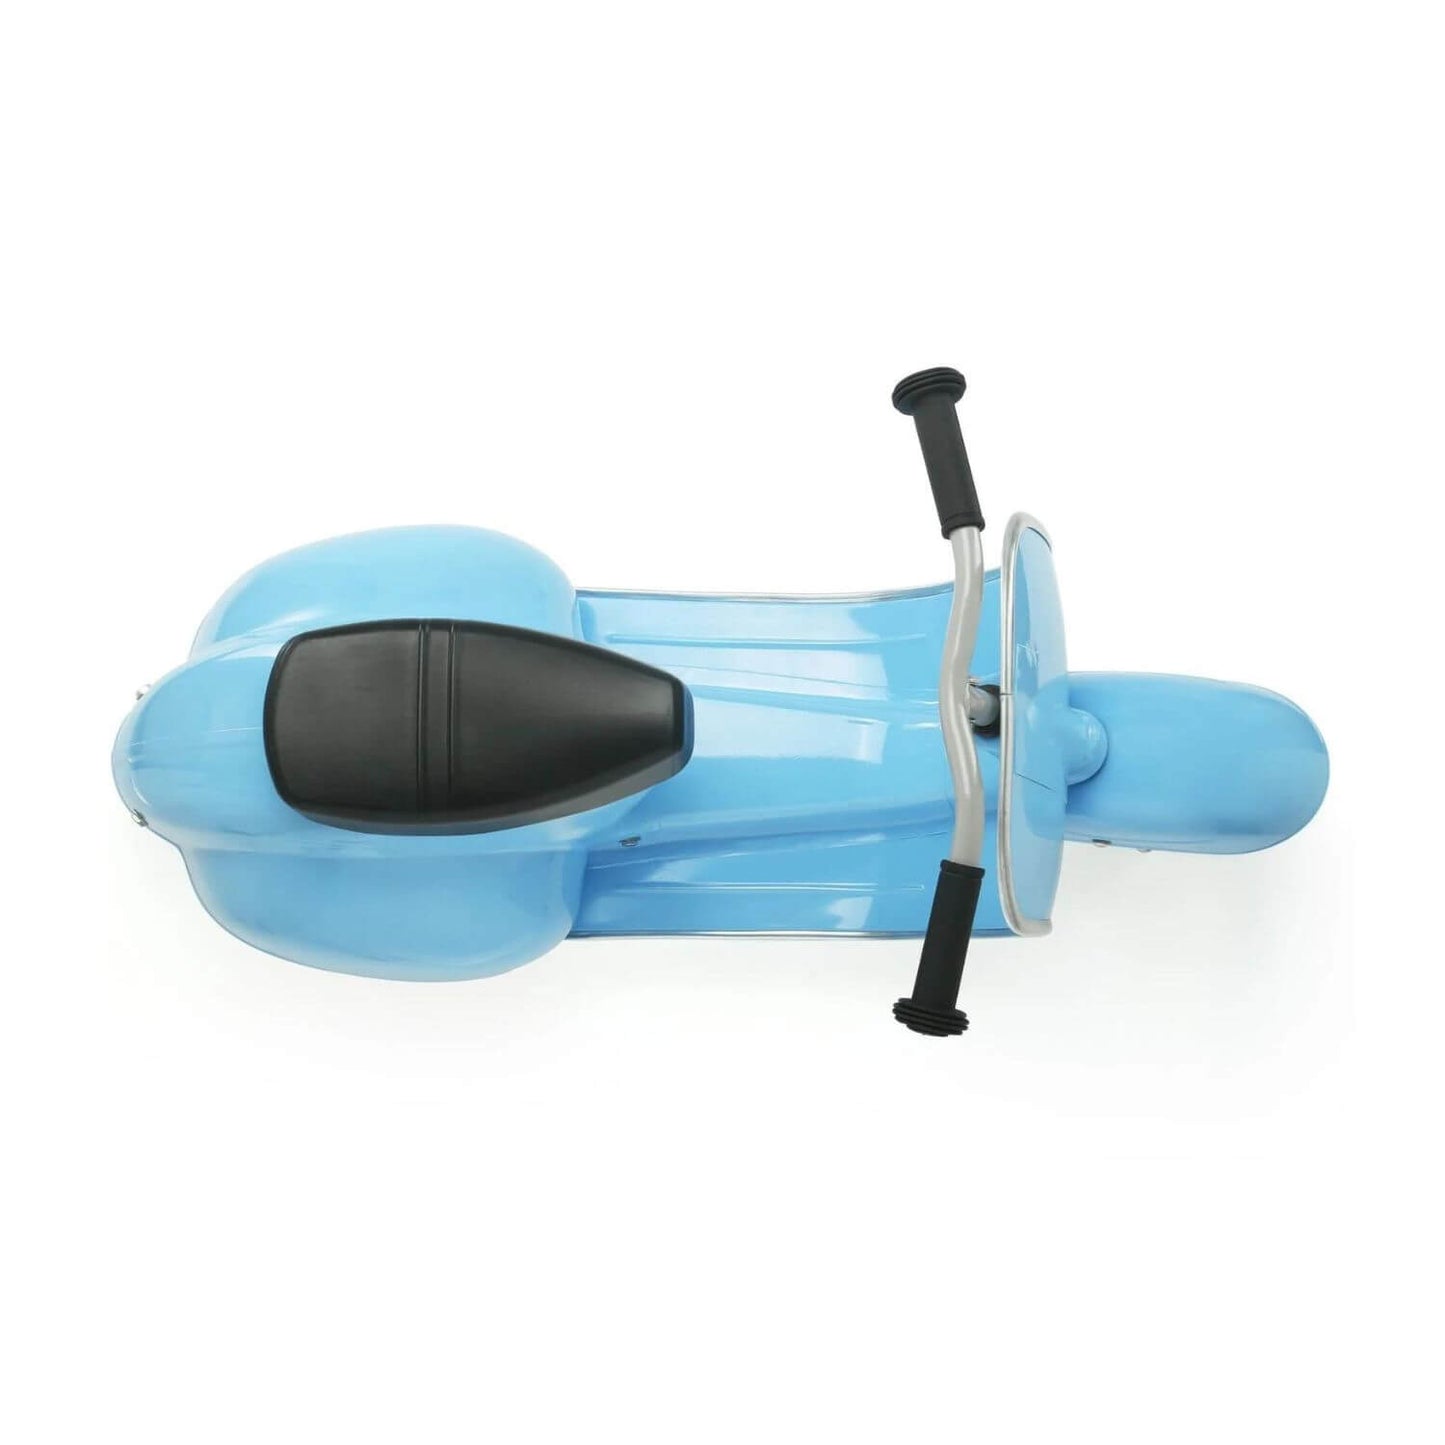 Primo Basic Ride-On with Plastic Seat Blue - Top View